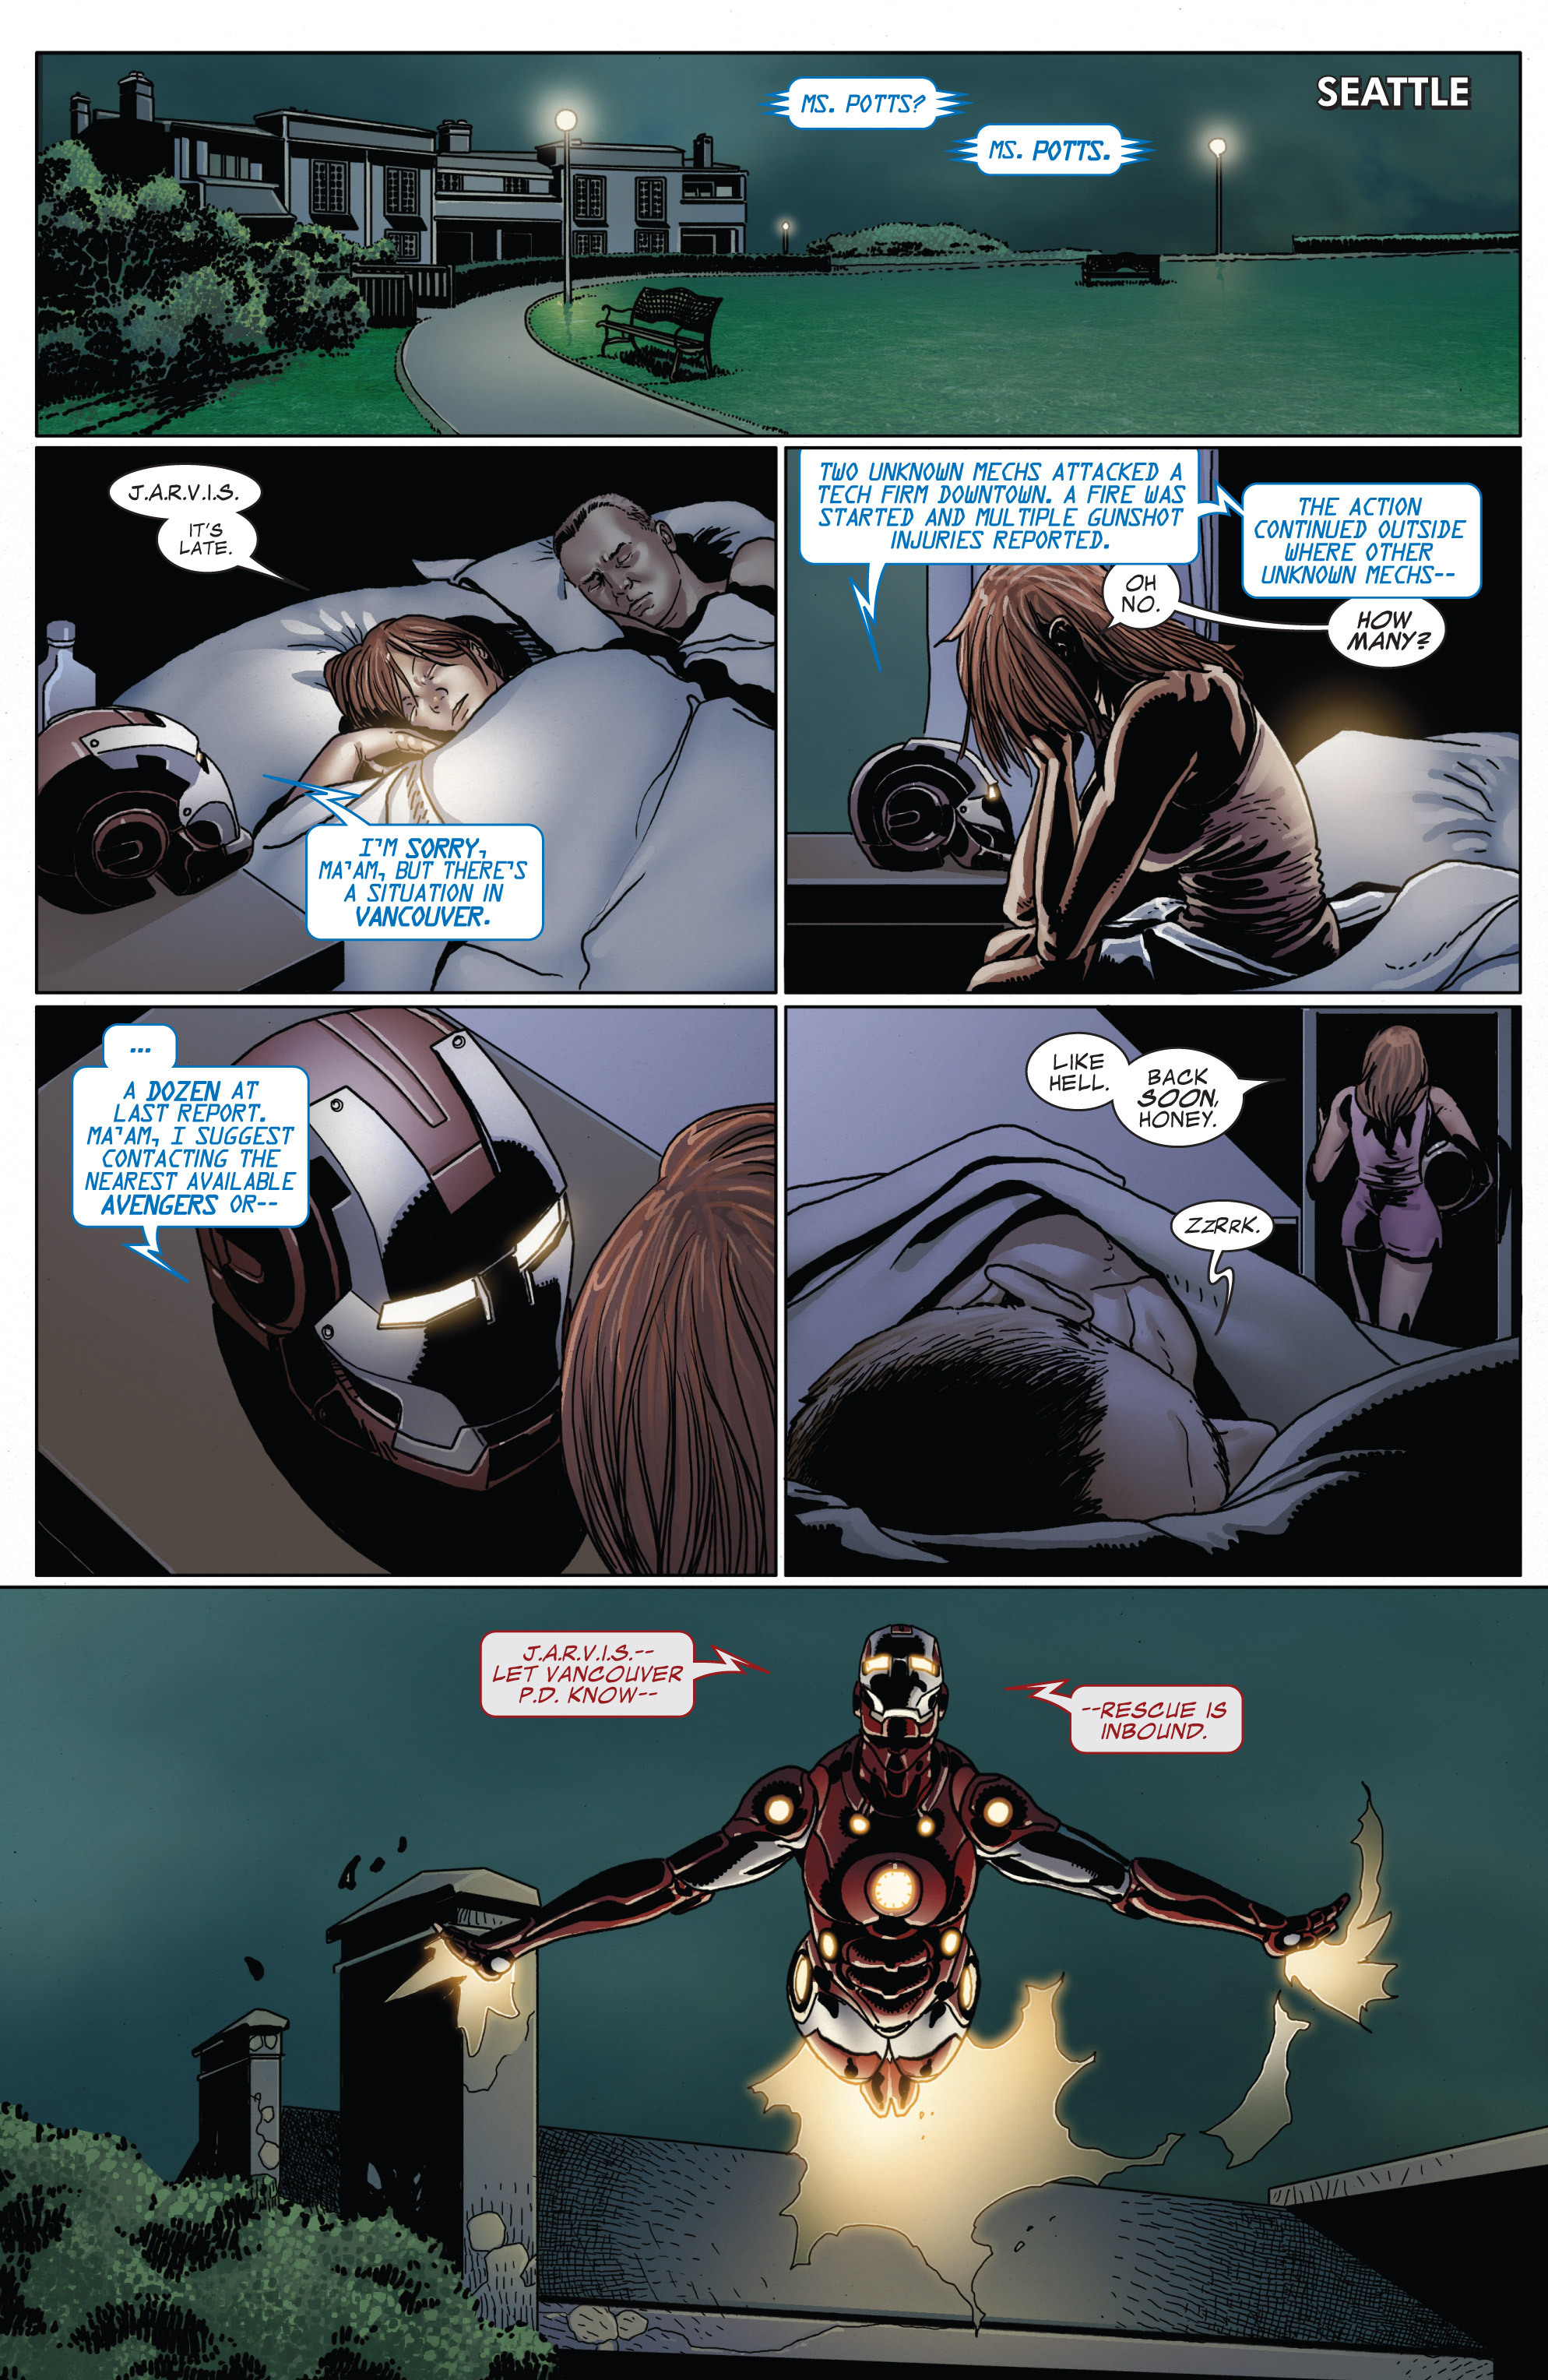 Invincible Iron Man (2008) 522 Page 7